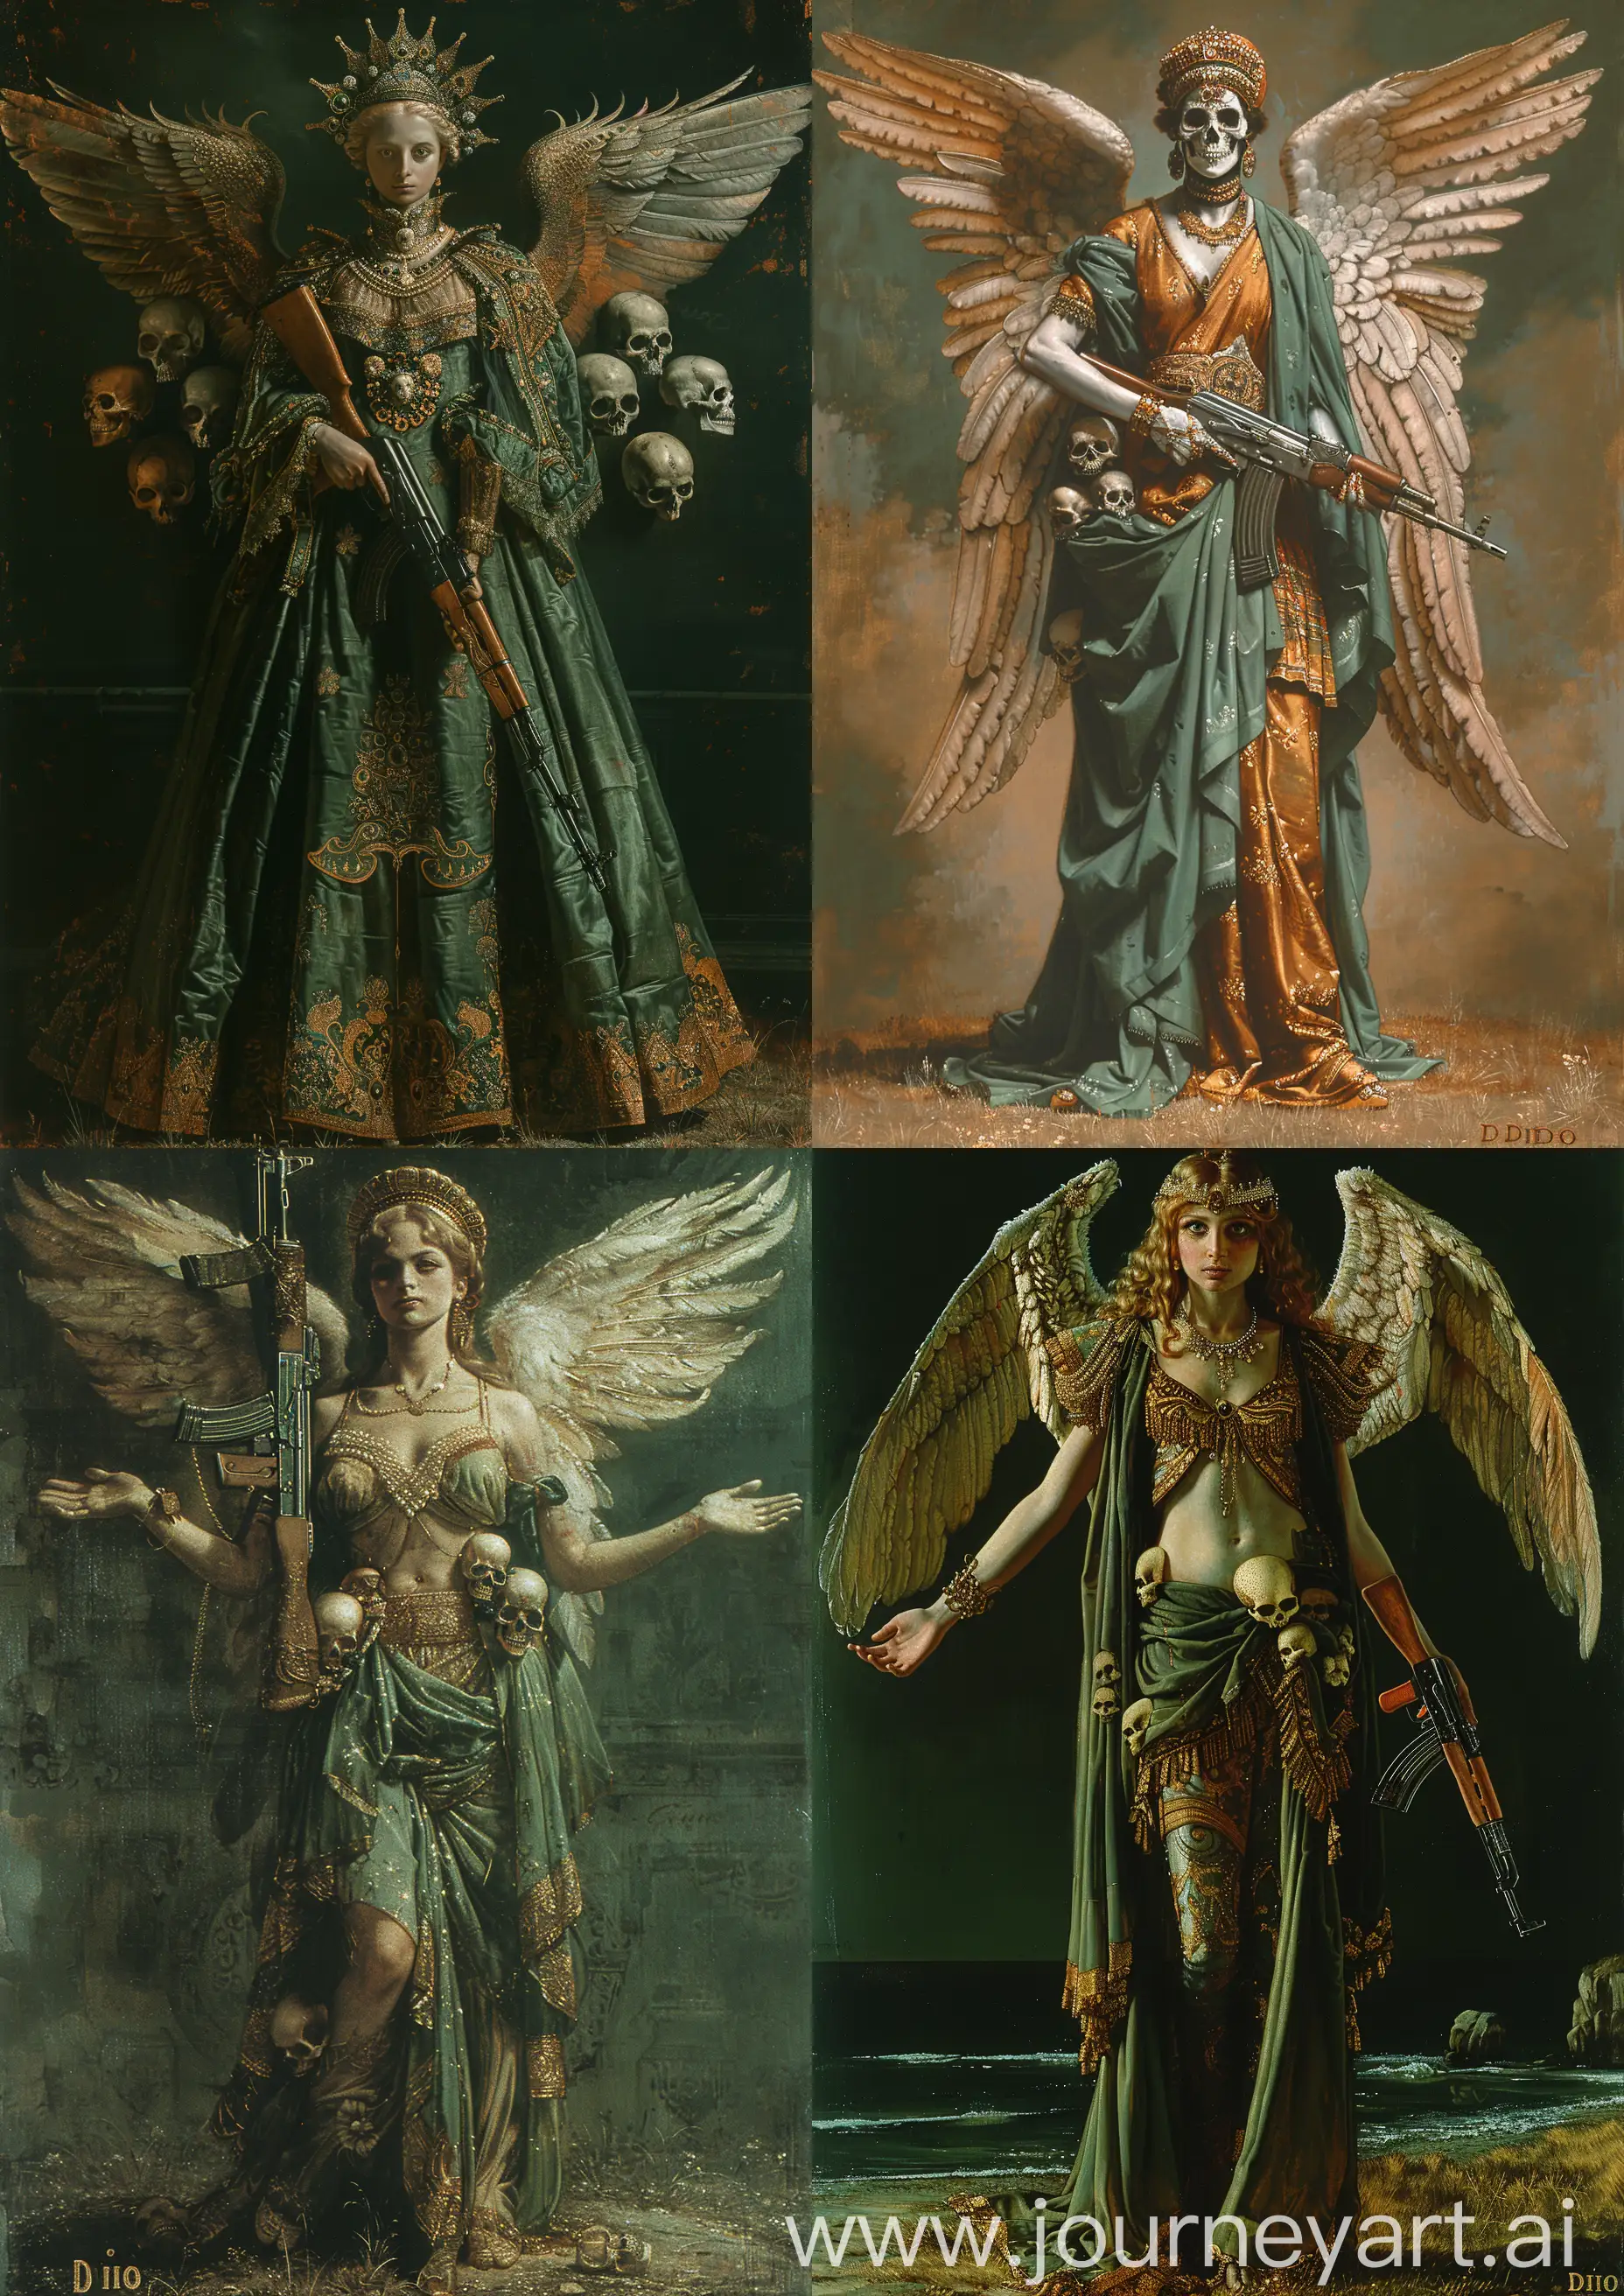 DIDO-Angelic-Warrior-Queen-with-Kalashnikov-in-Ornate-Gold-and-Silk-Robes